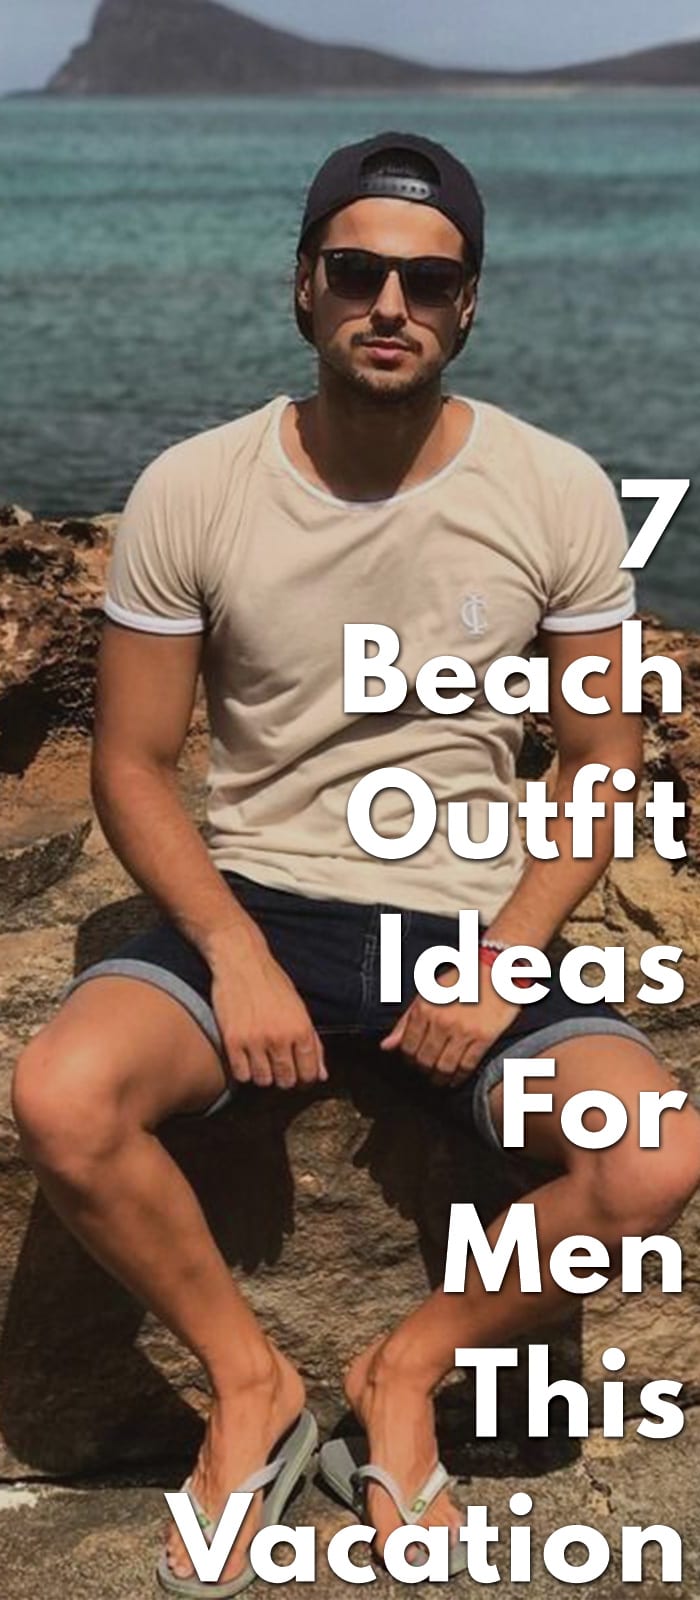 7-Beach-Outfit-Ideas-For-Men-This-Vacation...